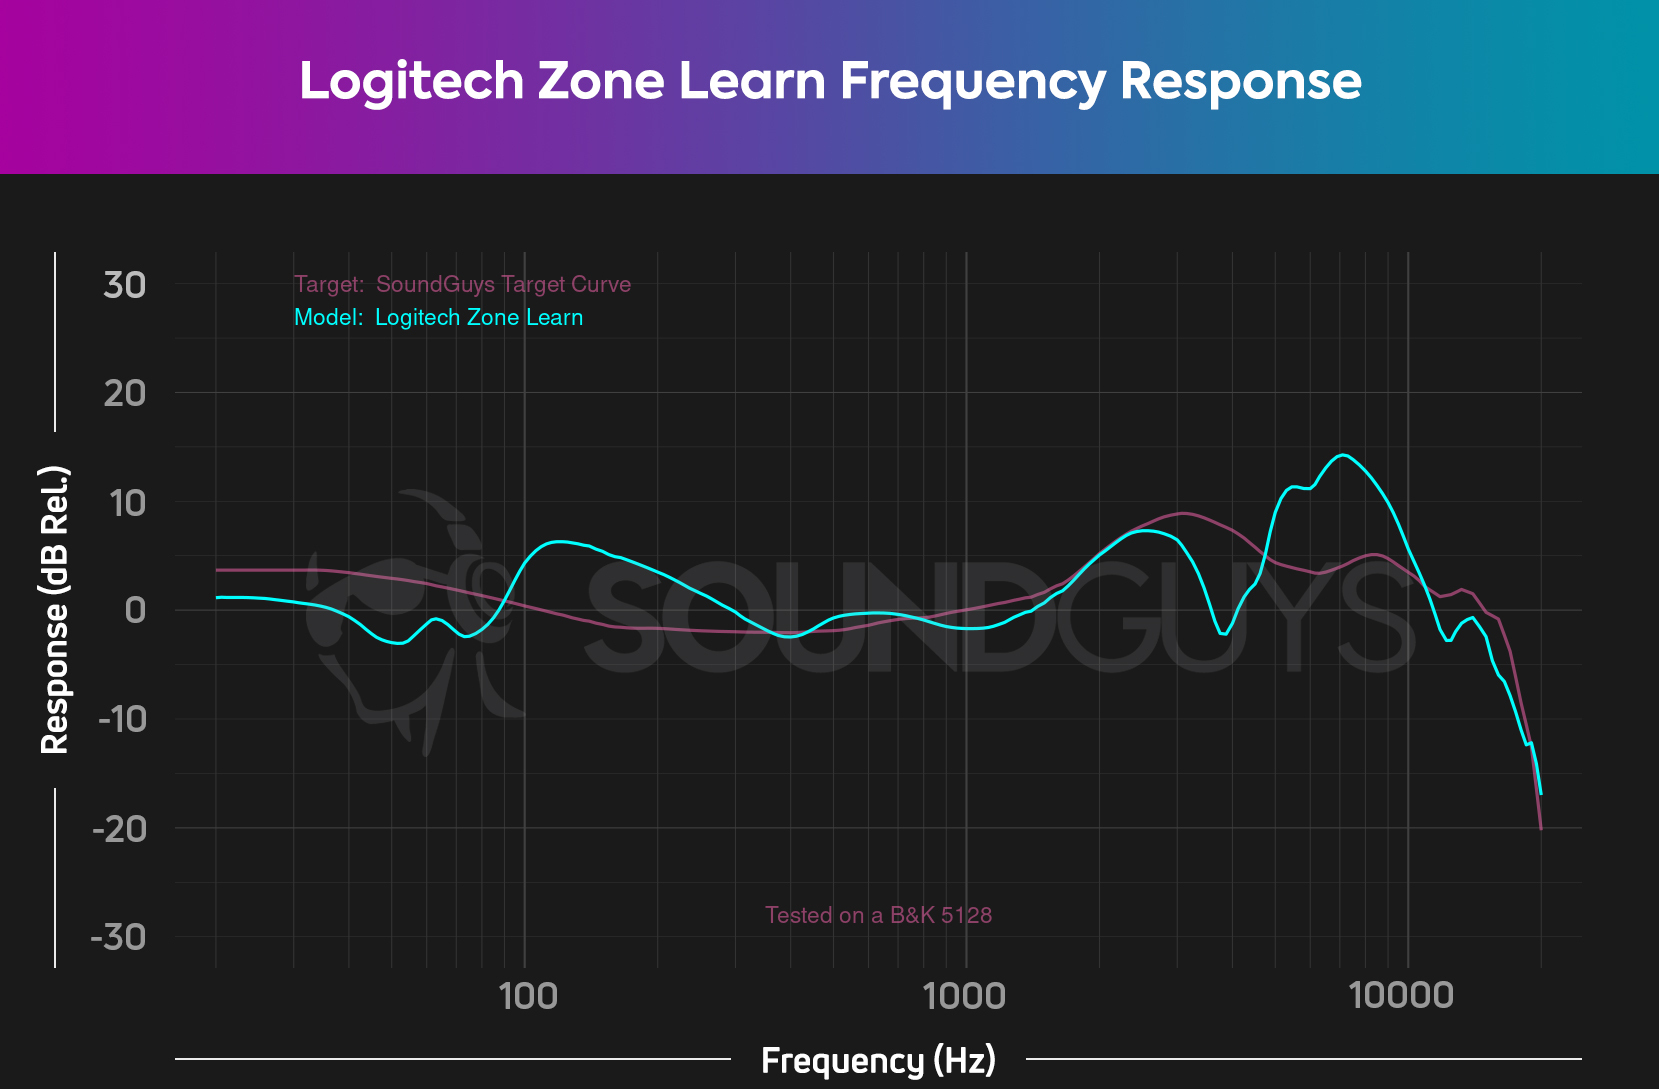 The Logitech Zone Learn frequency response chart showing some pretty wild deviations from the ideal curve across the board.